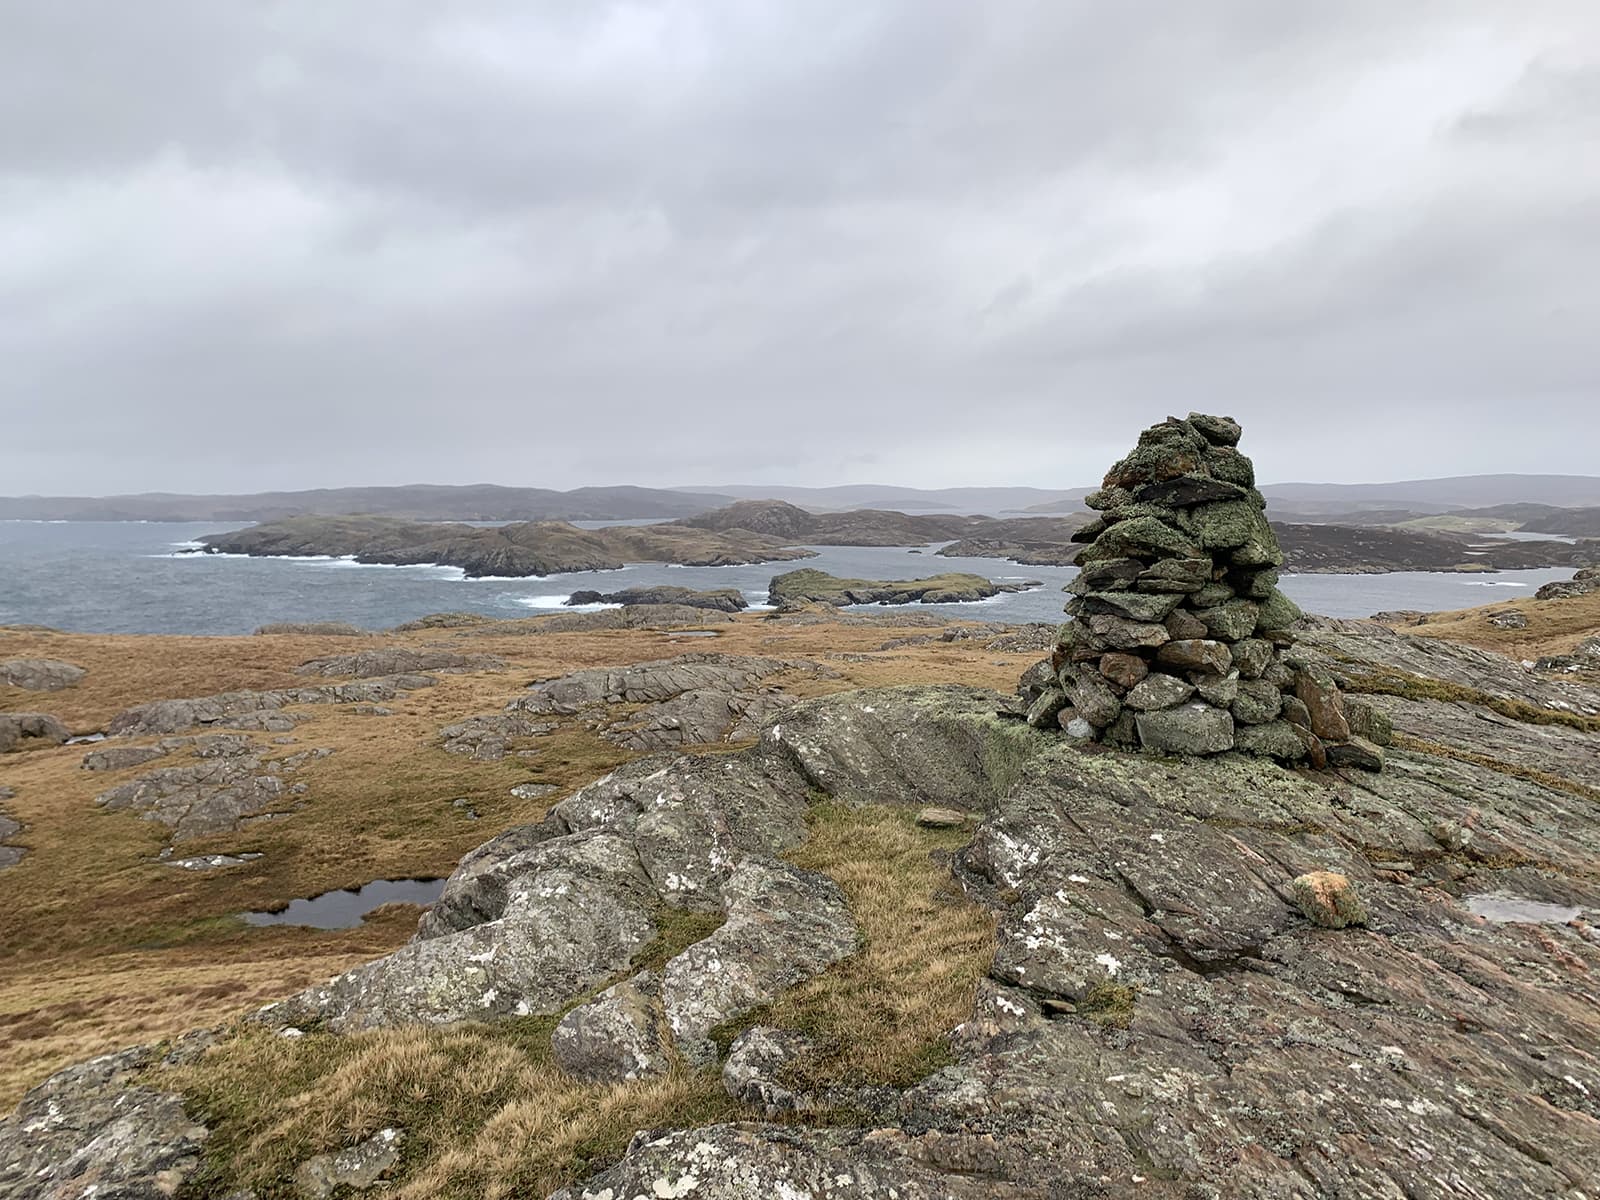 Image of a cairn at the top of Neeans Neap with the island of Vementry in the background.